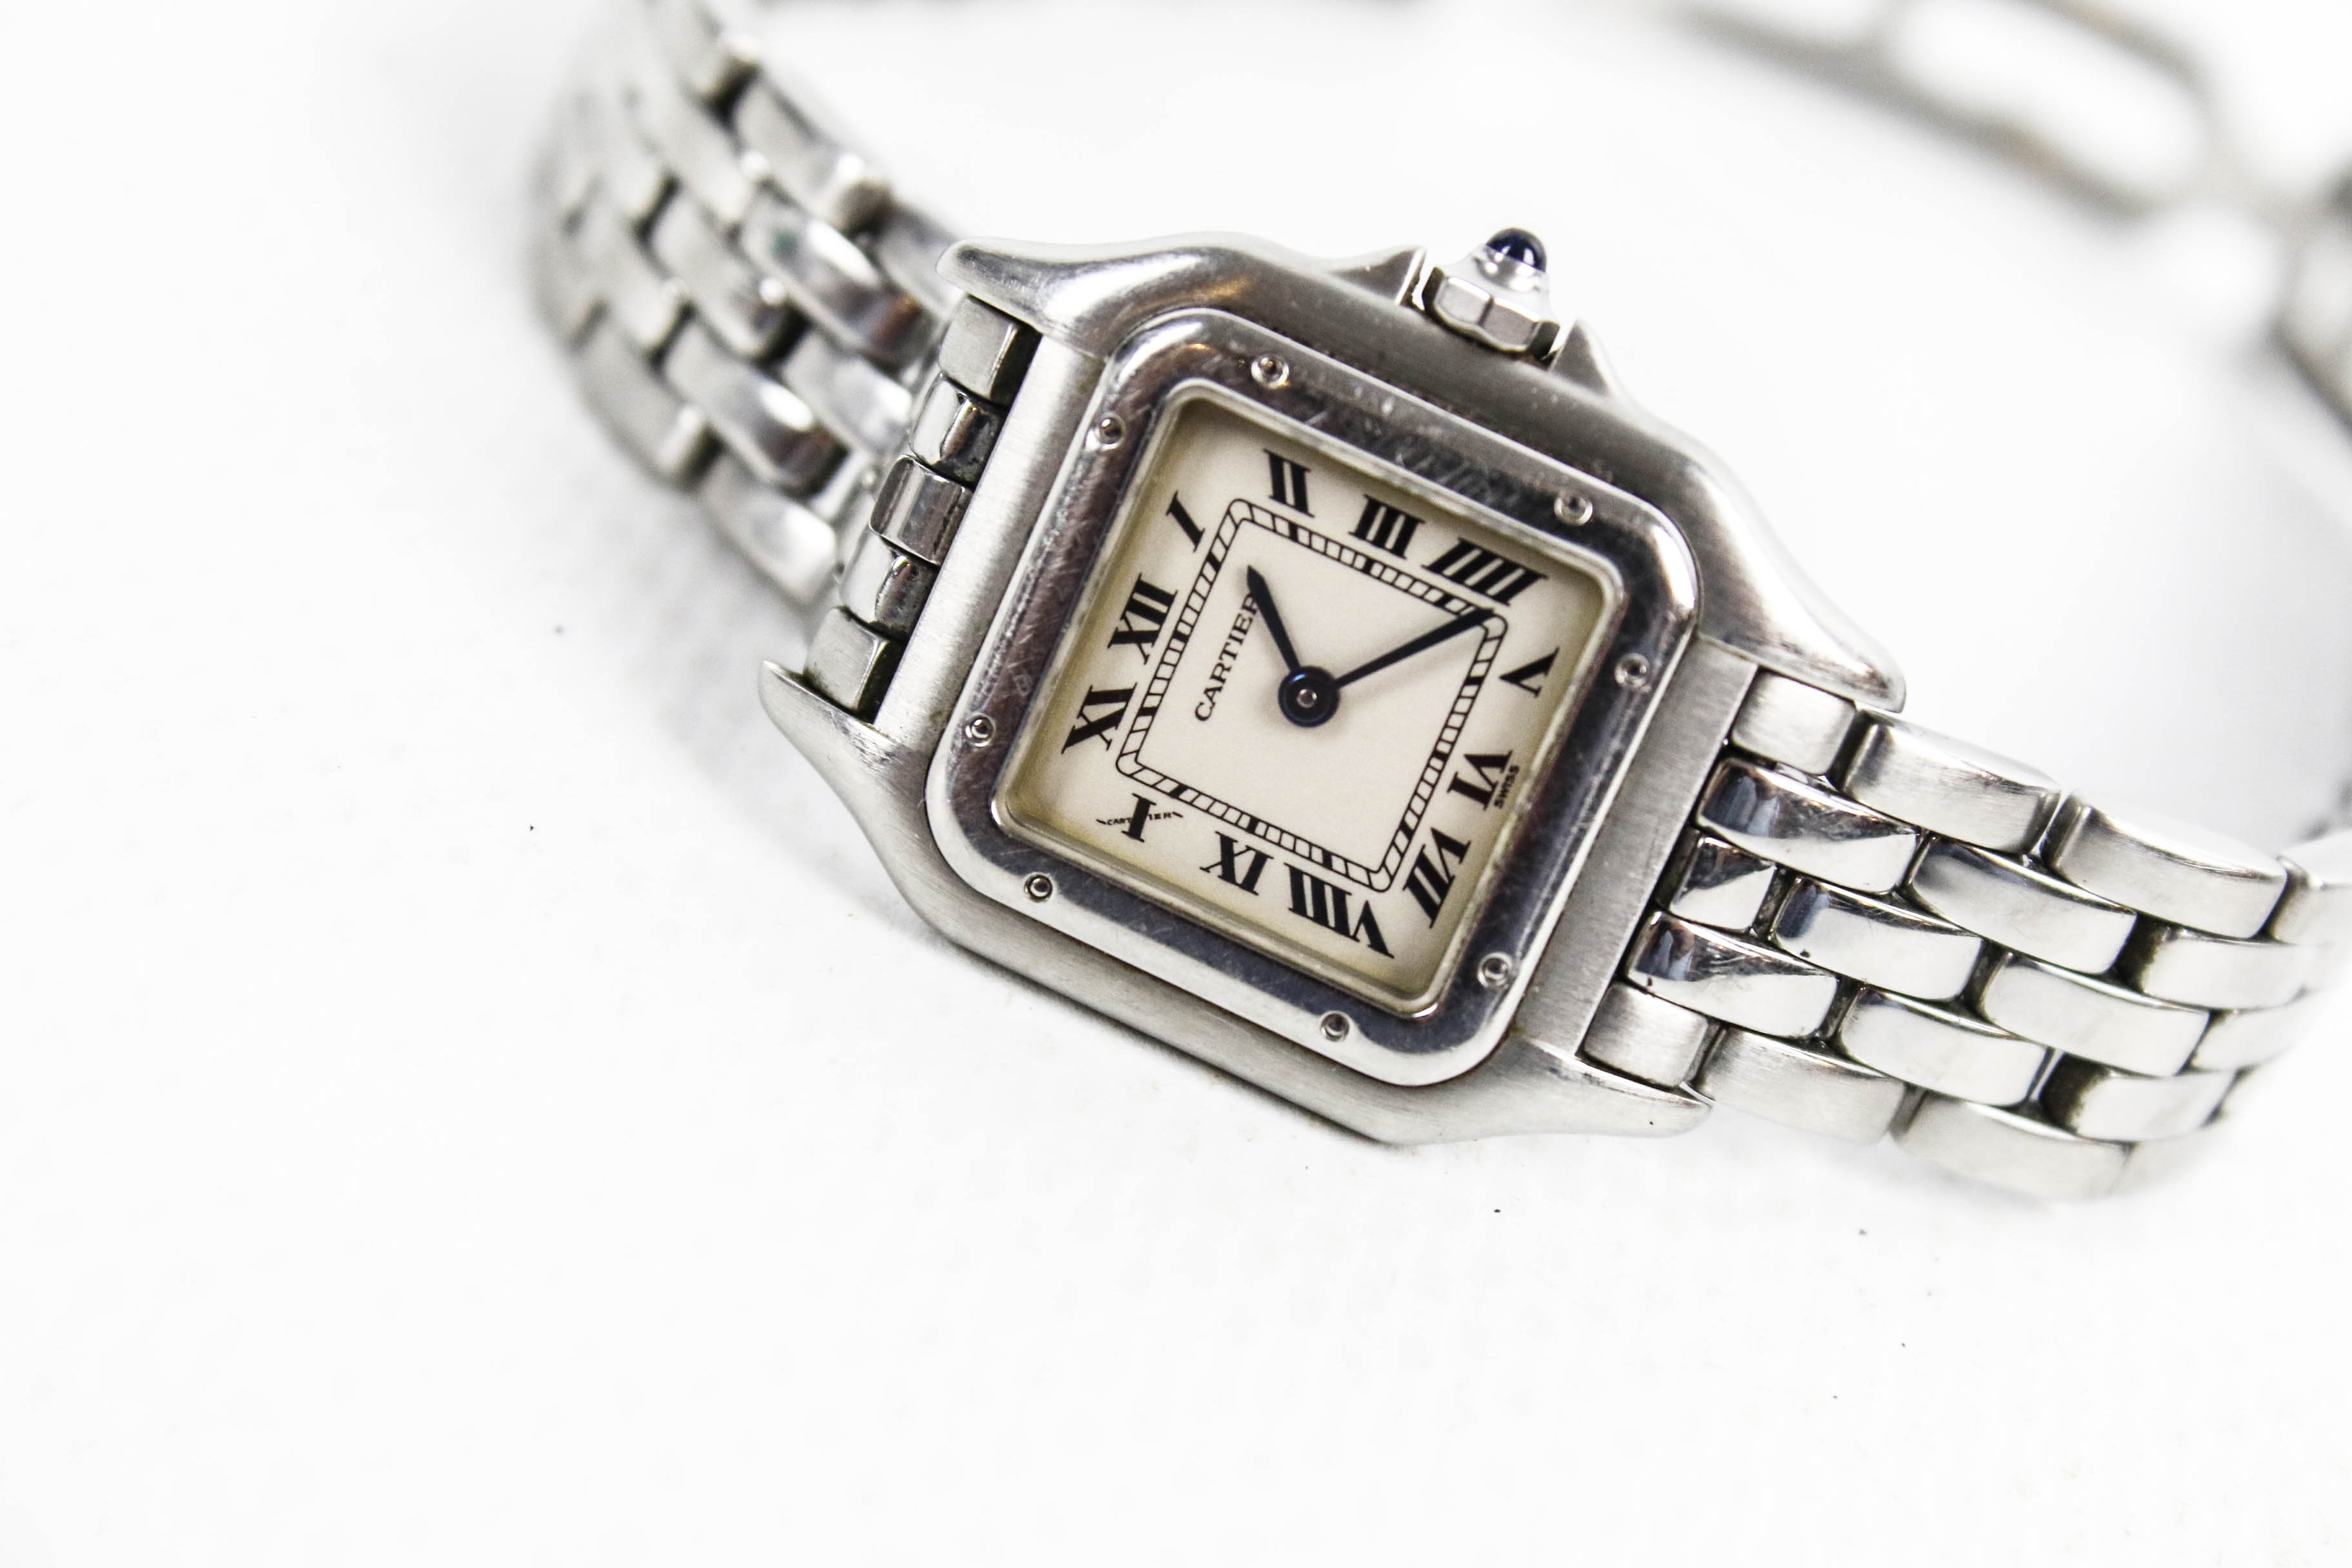 Cartier, Panthere, a lady's stainless steel bracelet watch, circa 2003, Ref 1320. - Image 5 of 6